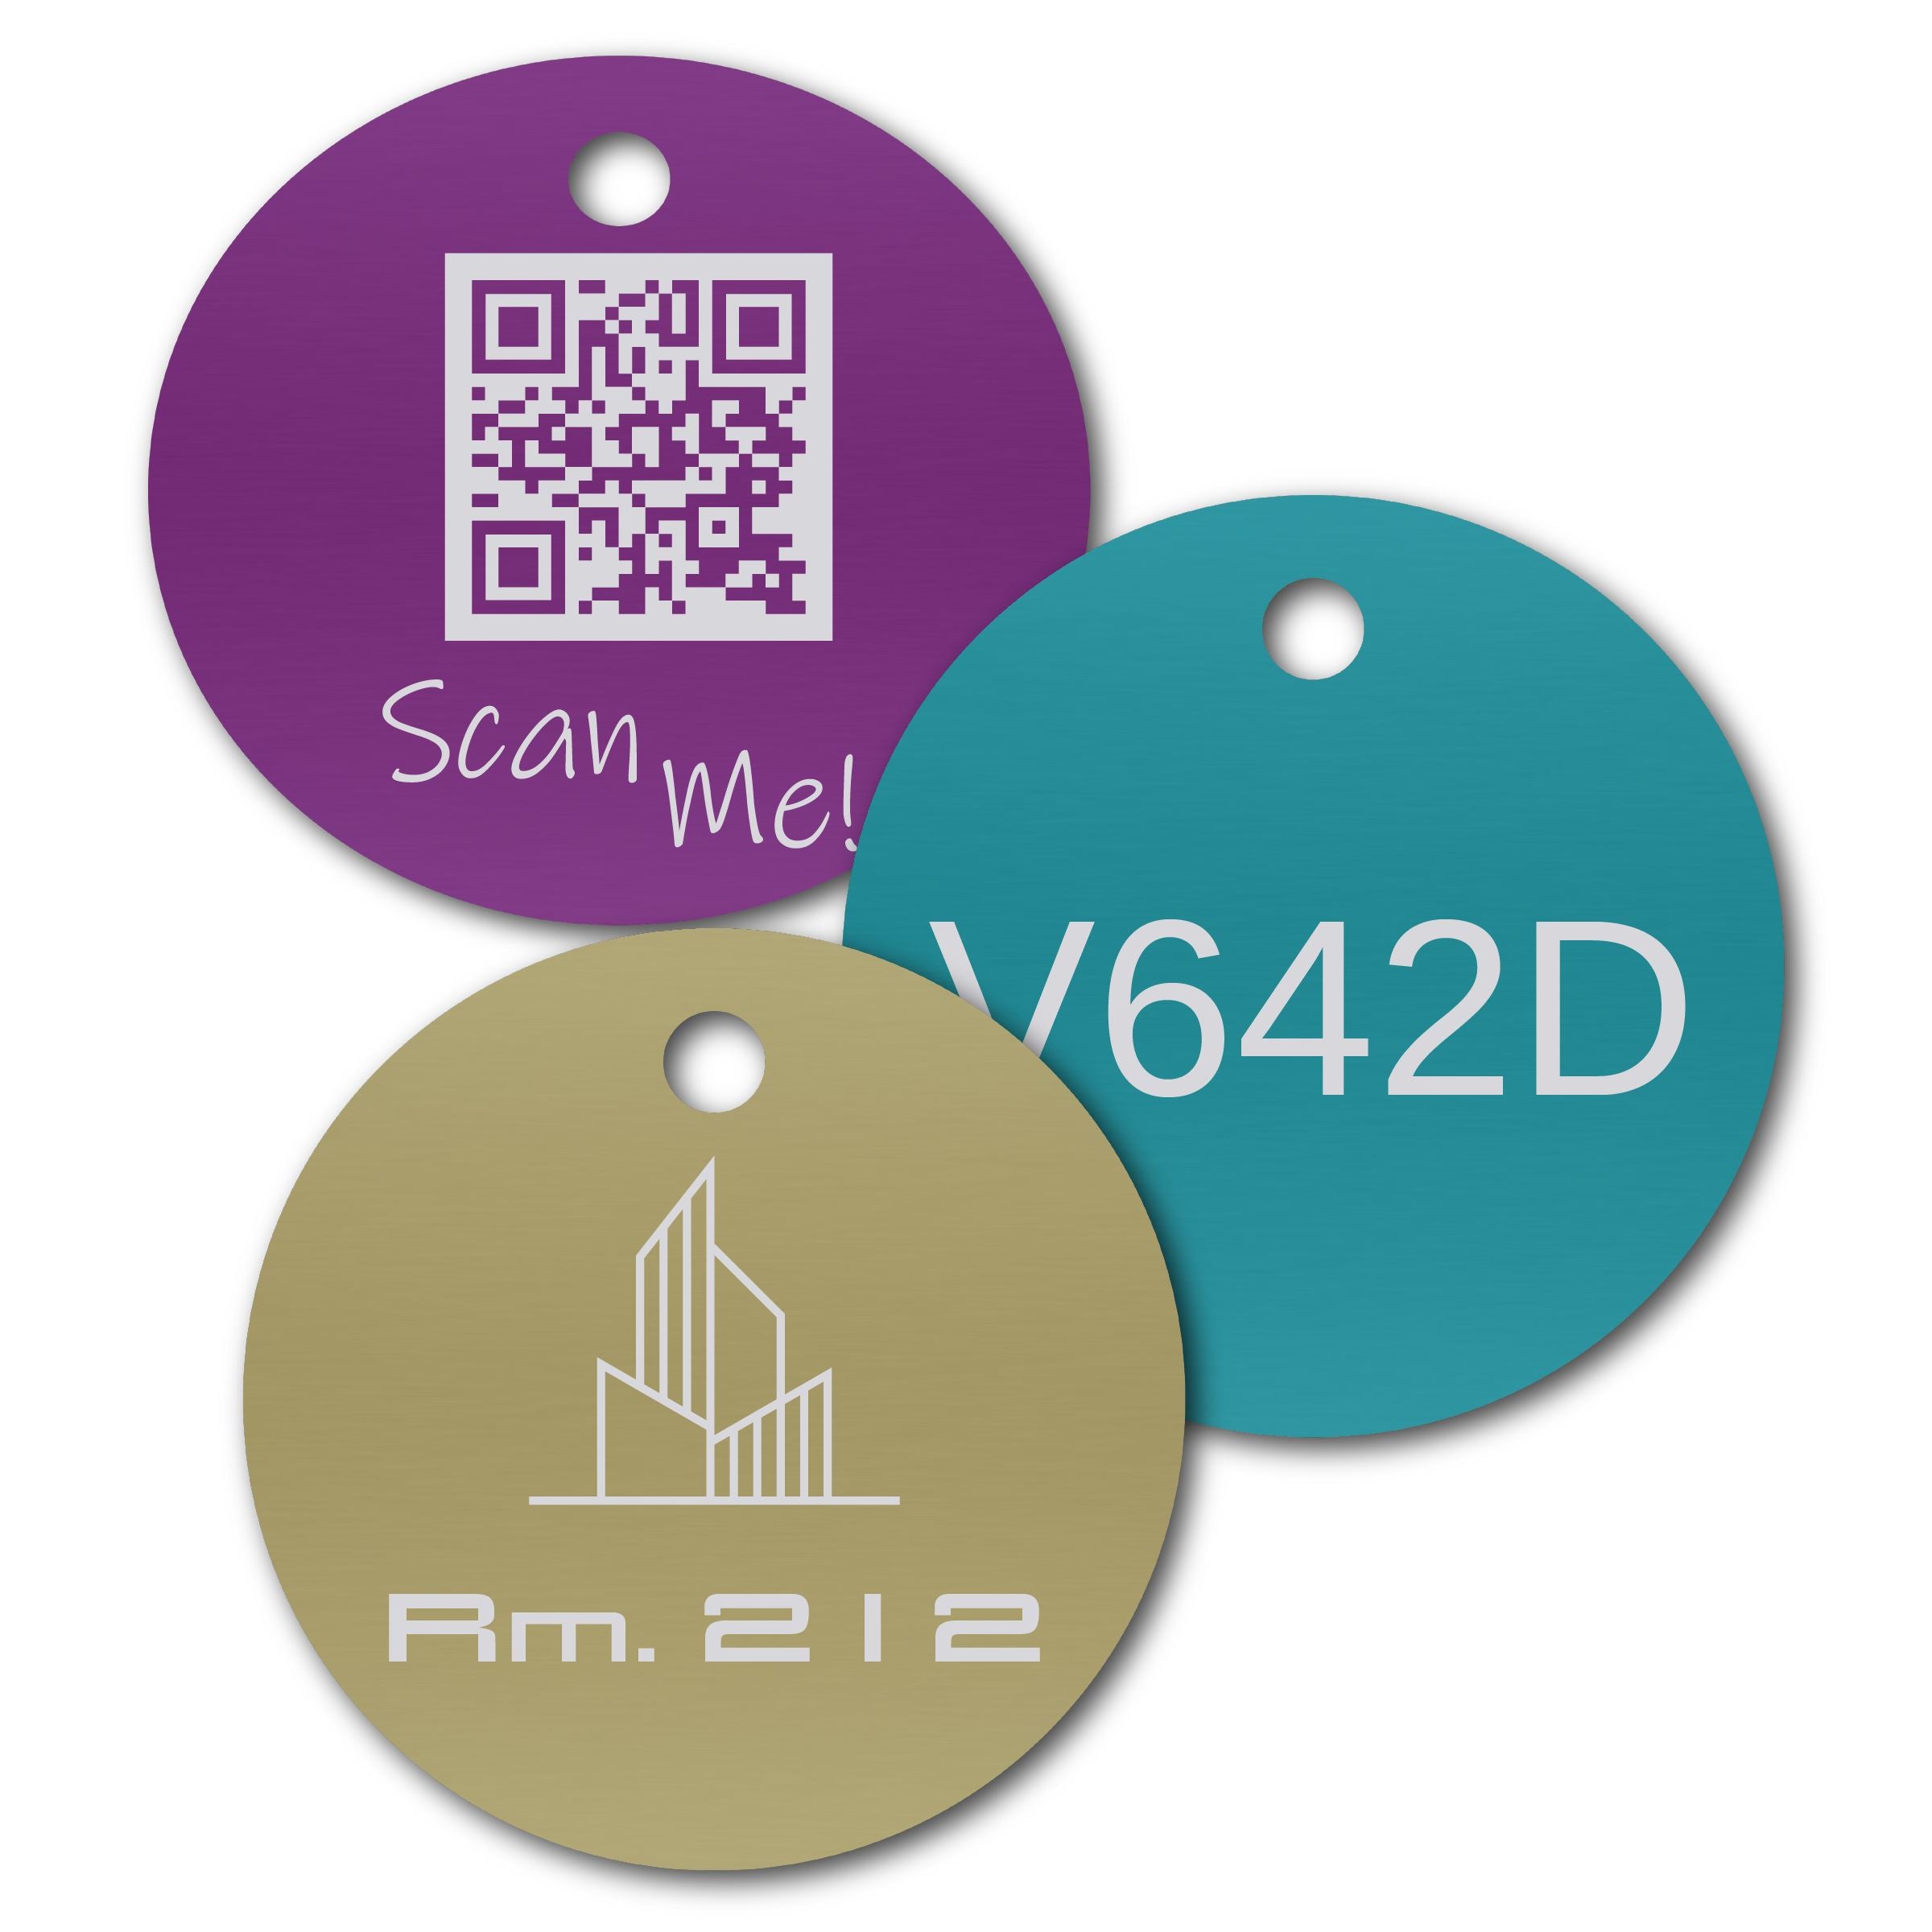 Anodized Aluminum Round Tags, 2" with 3/16" Hole, Laser Engraved Metal Tags Craftworks NW 